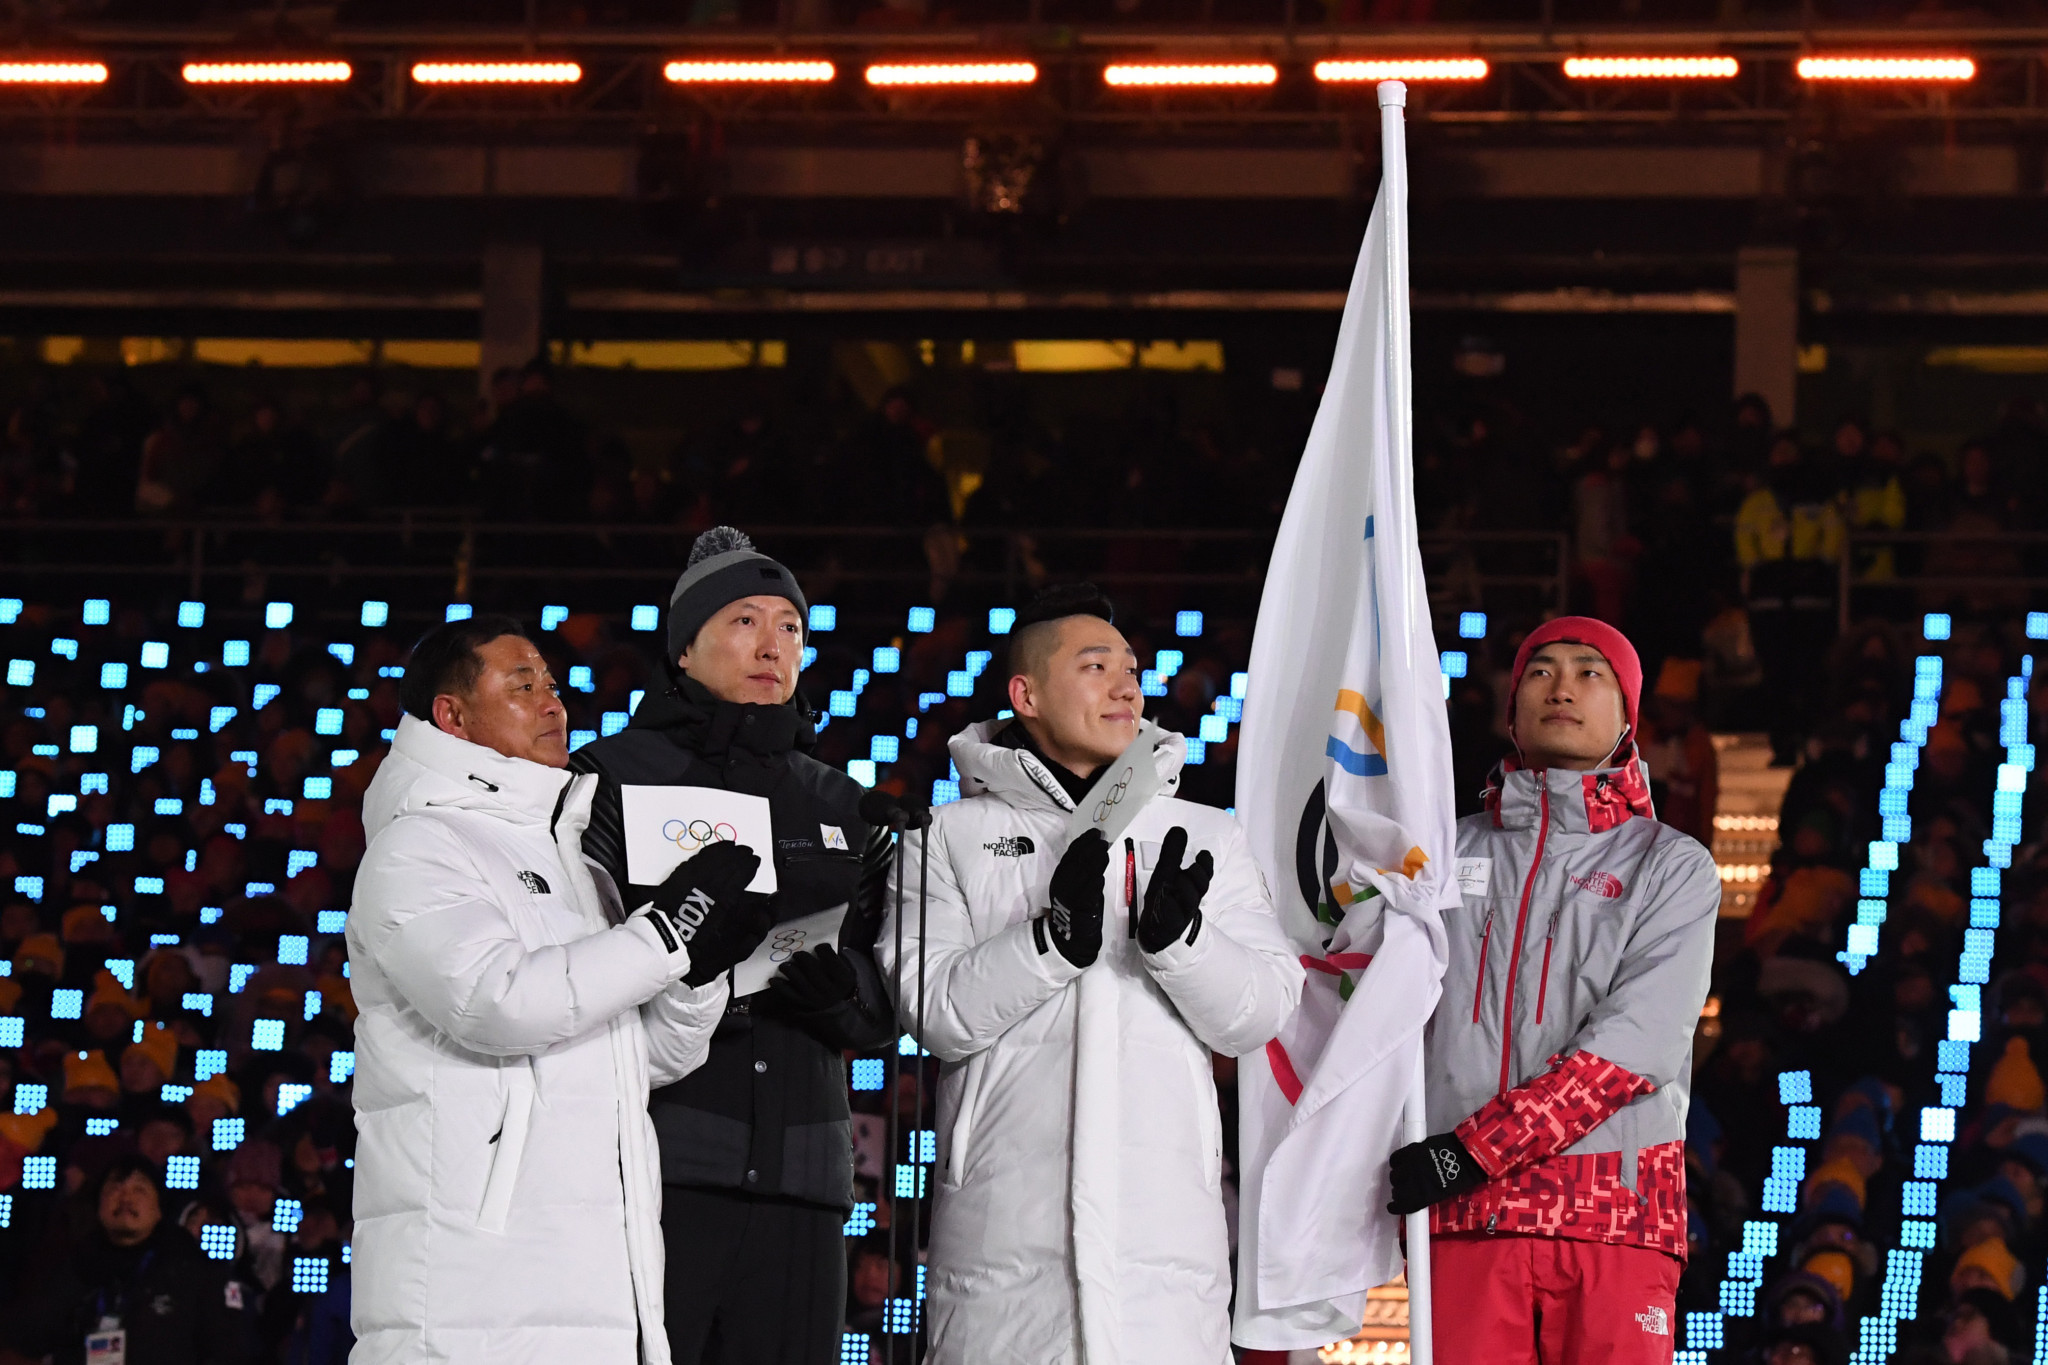 The Olympic Oath is taken at the Pyeongchang 2018 Opening Ceremony ©Getty Images